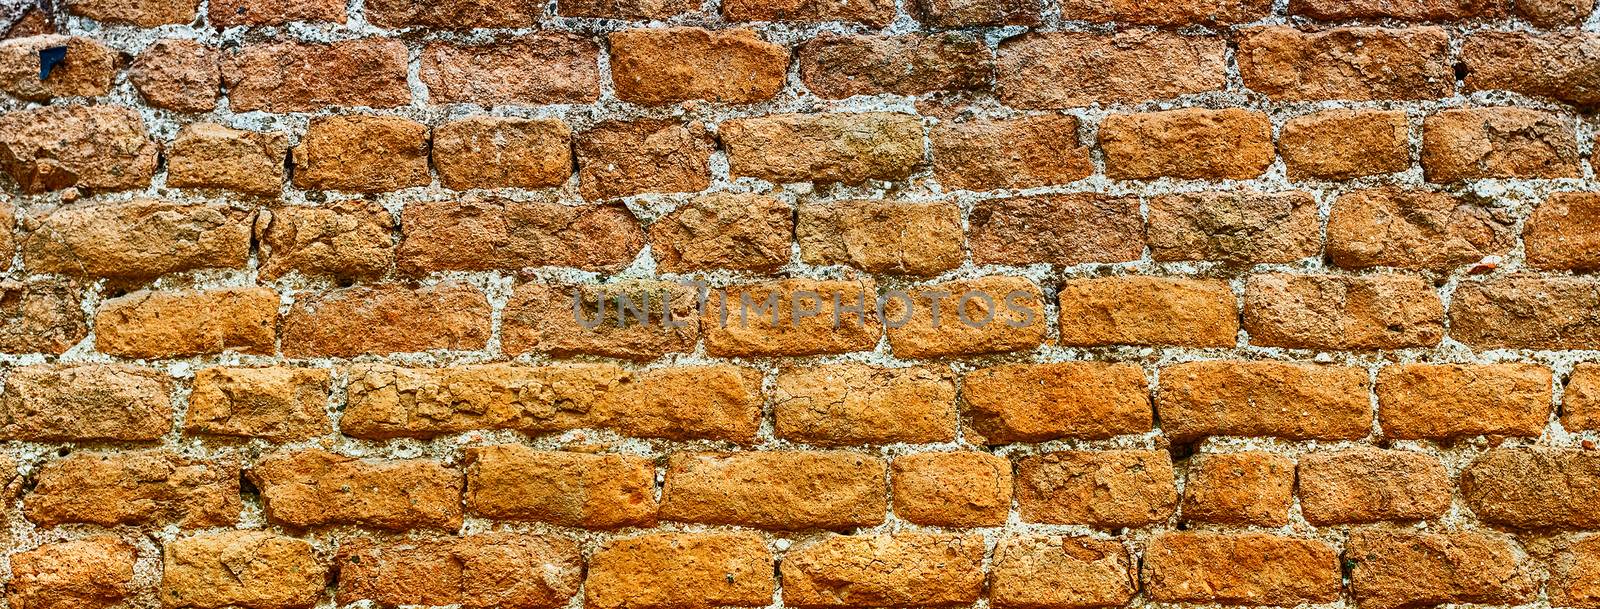 Stone Brick Wall Texture with copy space. May be used as background